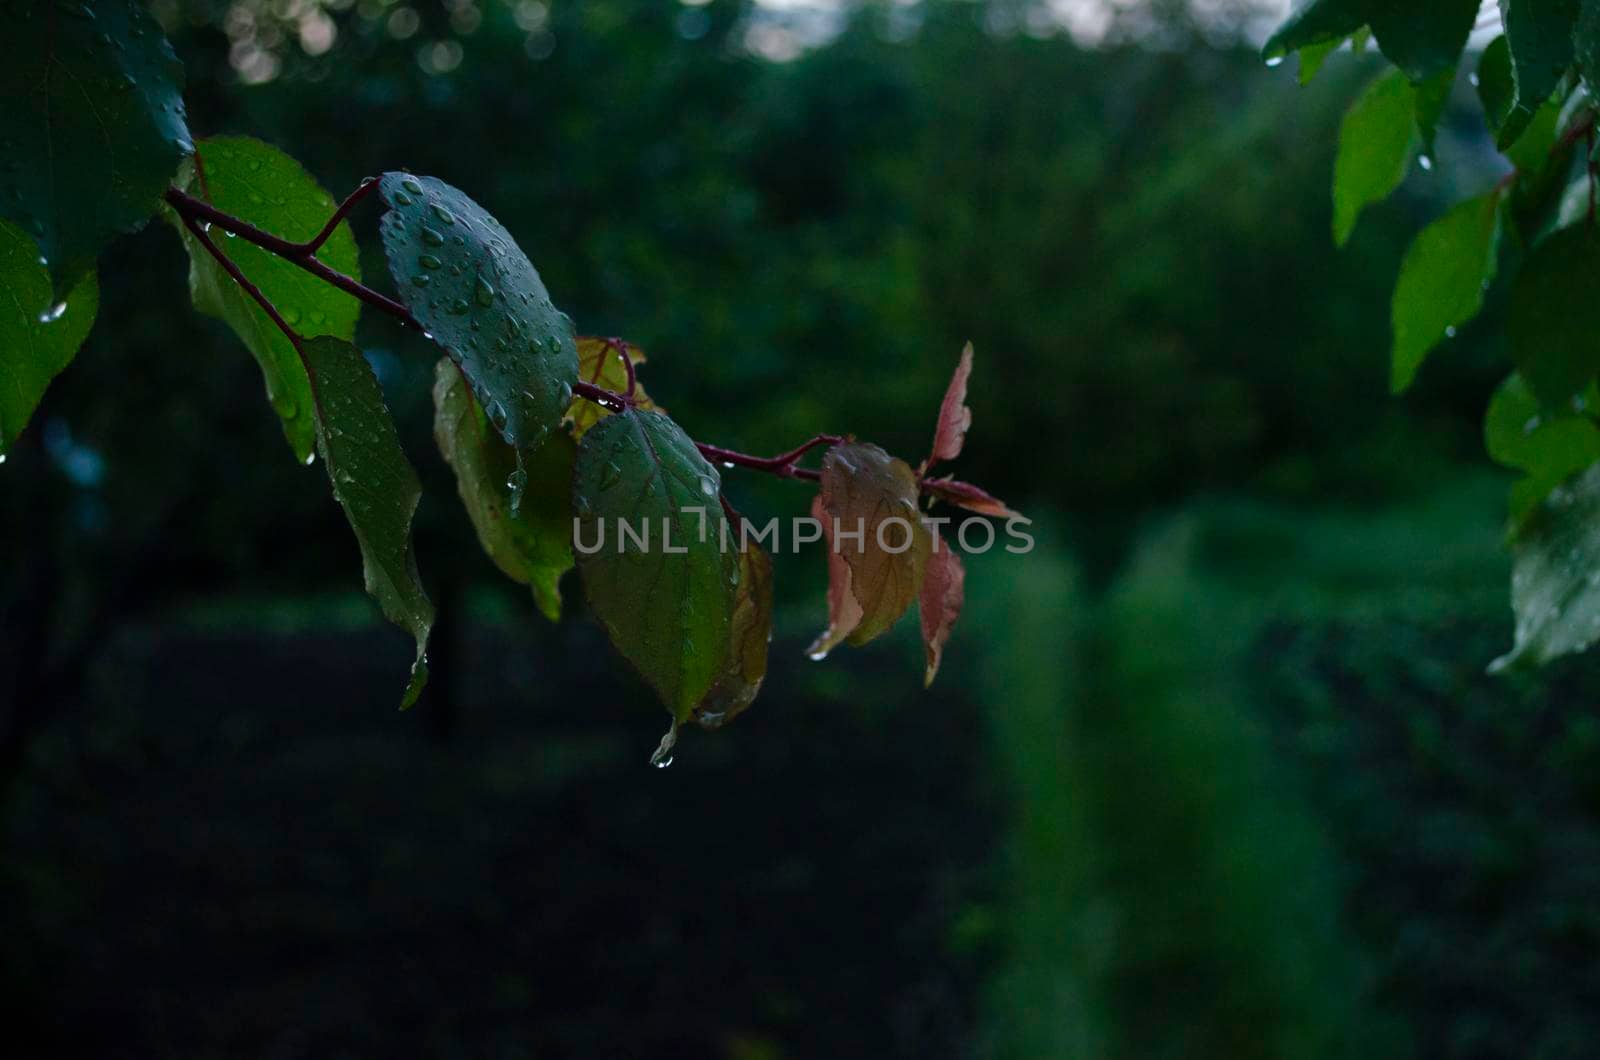 Raindrops on the leaves of a fruit tree. Branches of garden trees on a spring evening. Cozy atmosphere of a fresh garden. Young cones in the spring. Wet after the rain, with green leaves thickly and beautifully wraps around the fence in the yard